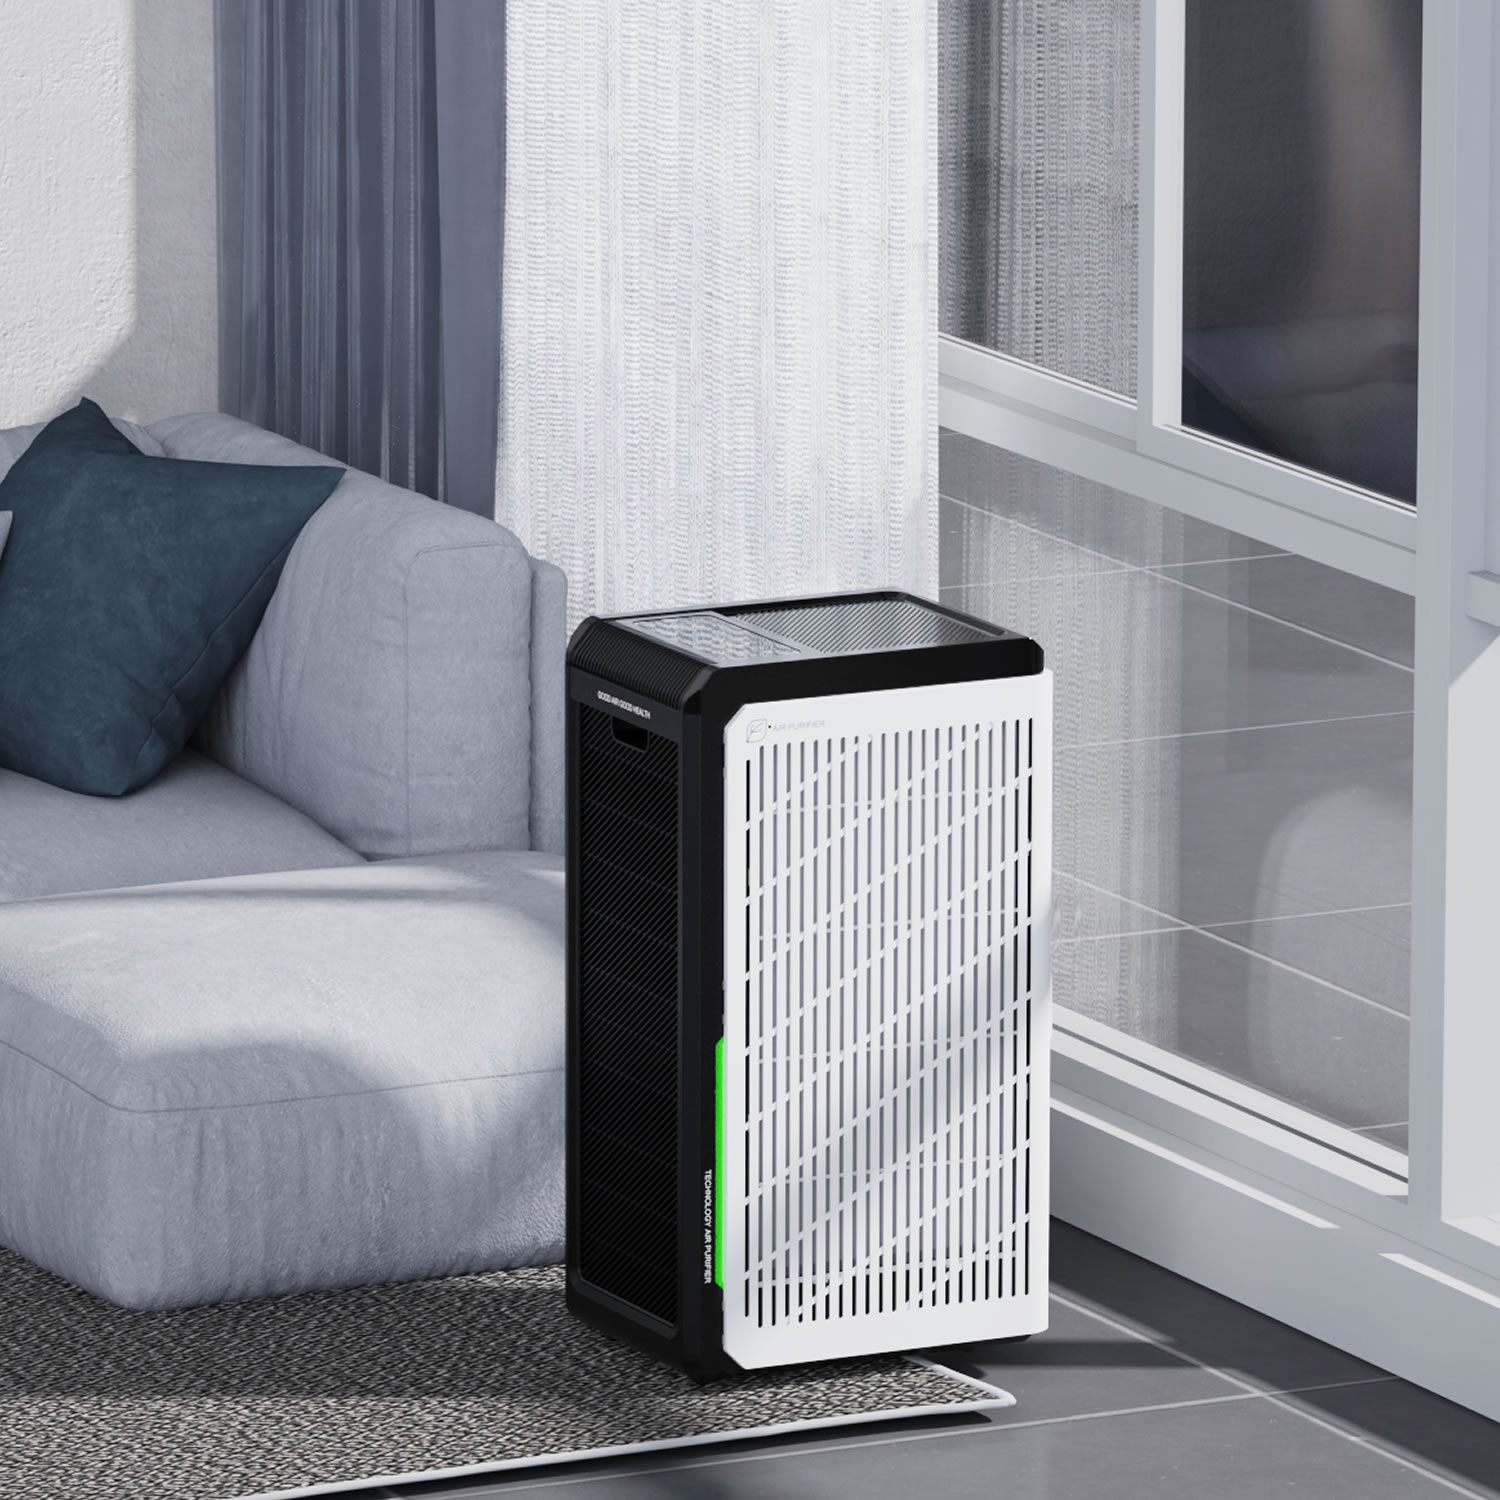 deodorization and sterilization air purifier products